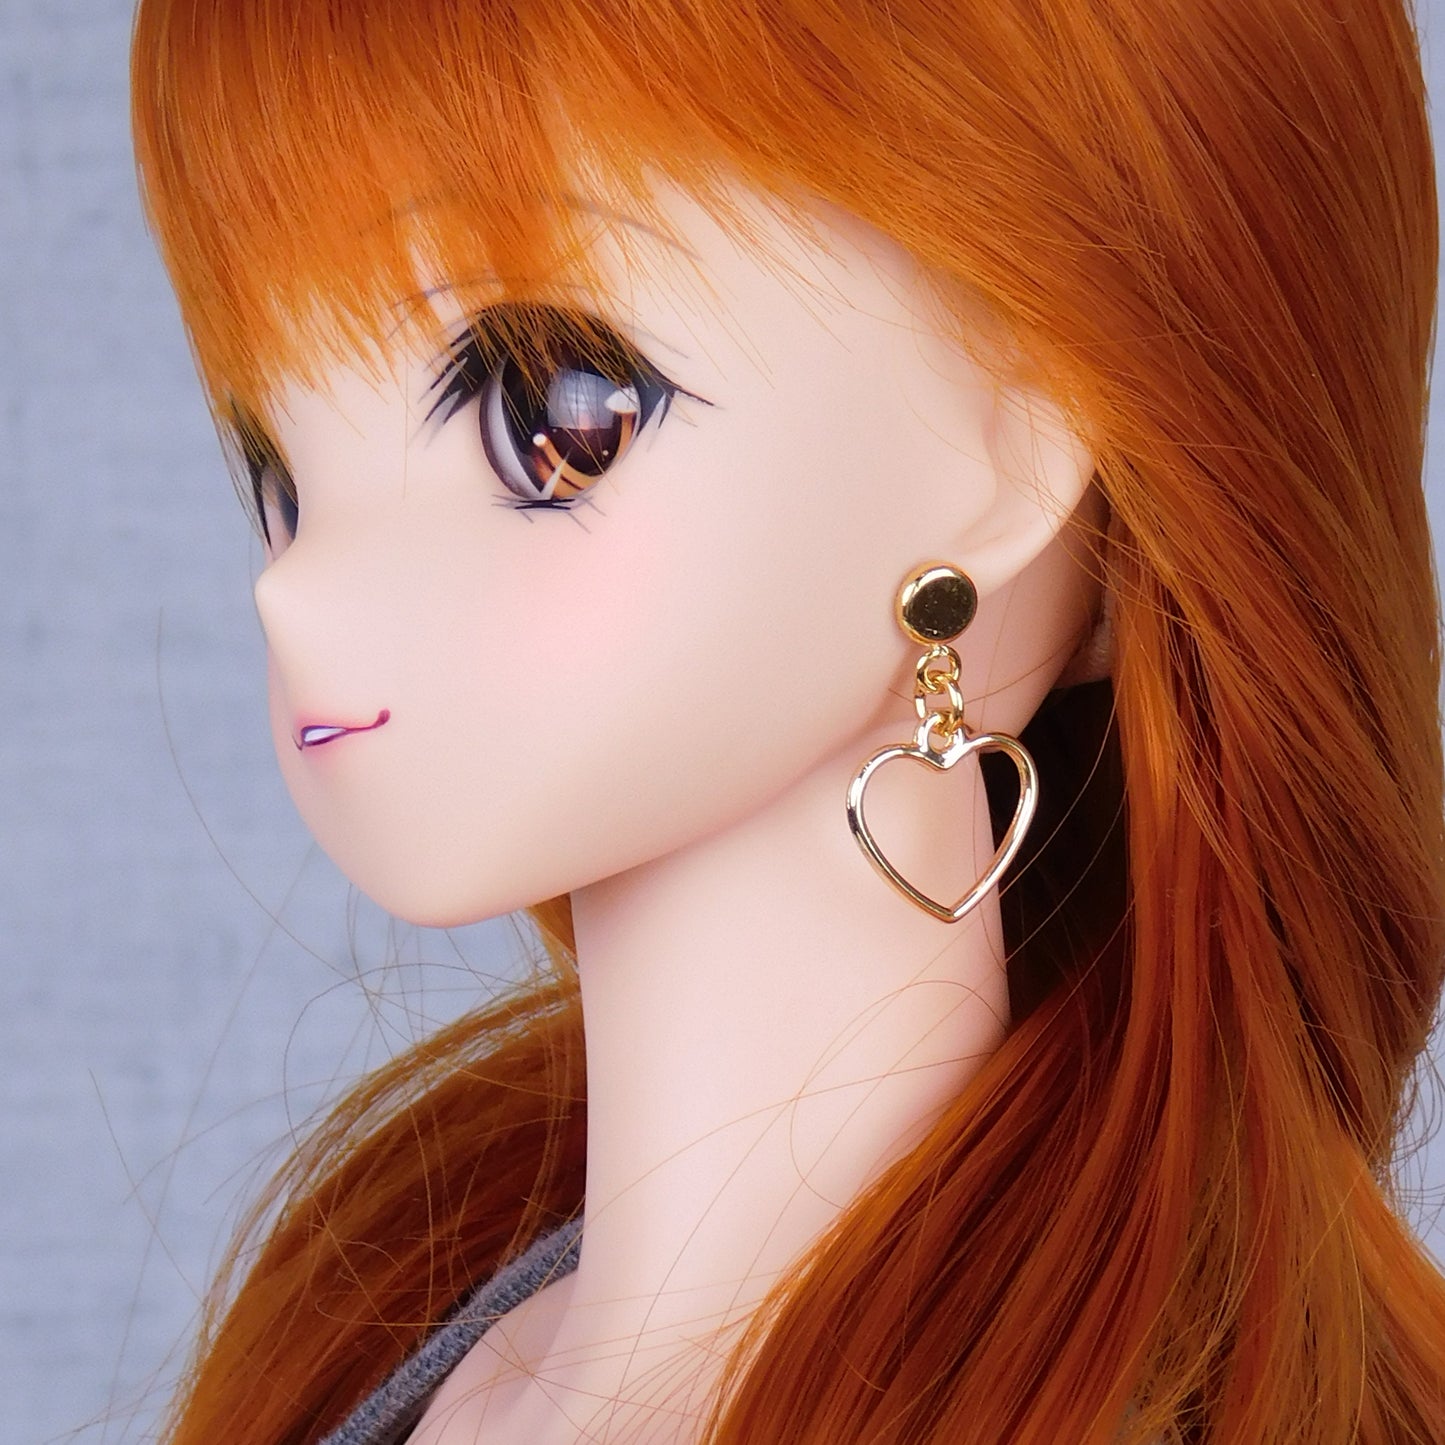 No-Hole Earrings for Vinyl Dolls  - Med Heart Hoops (Silver or Gold)